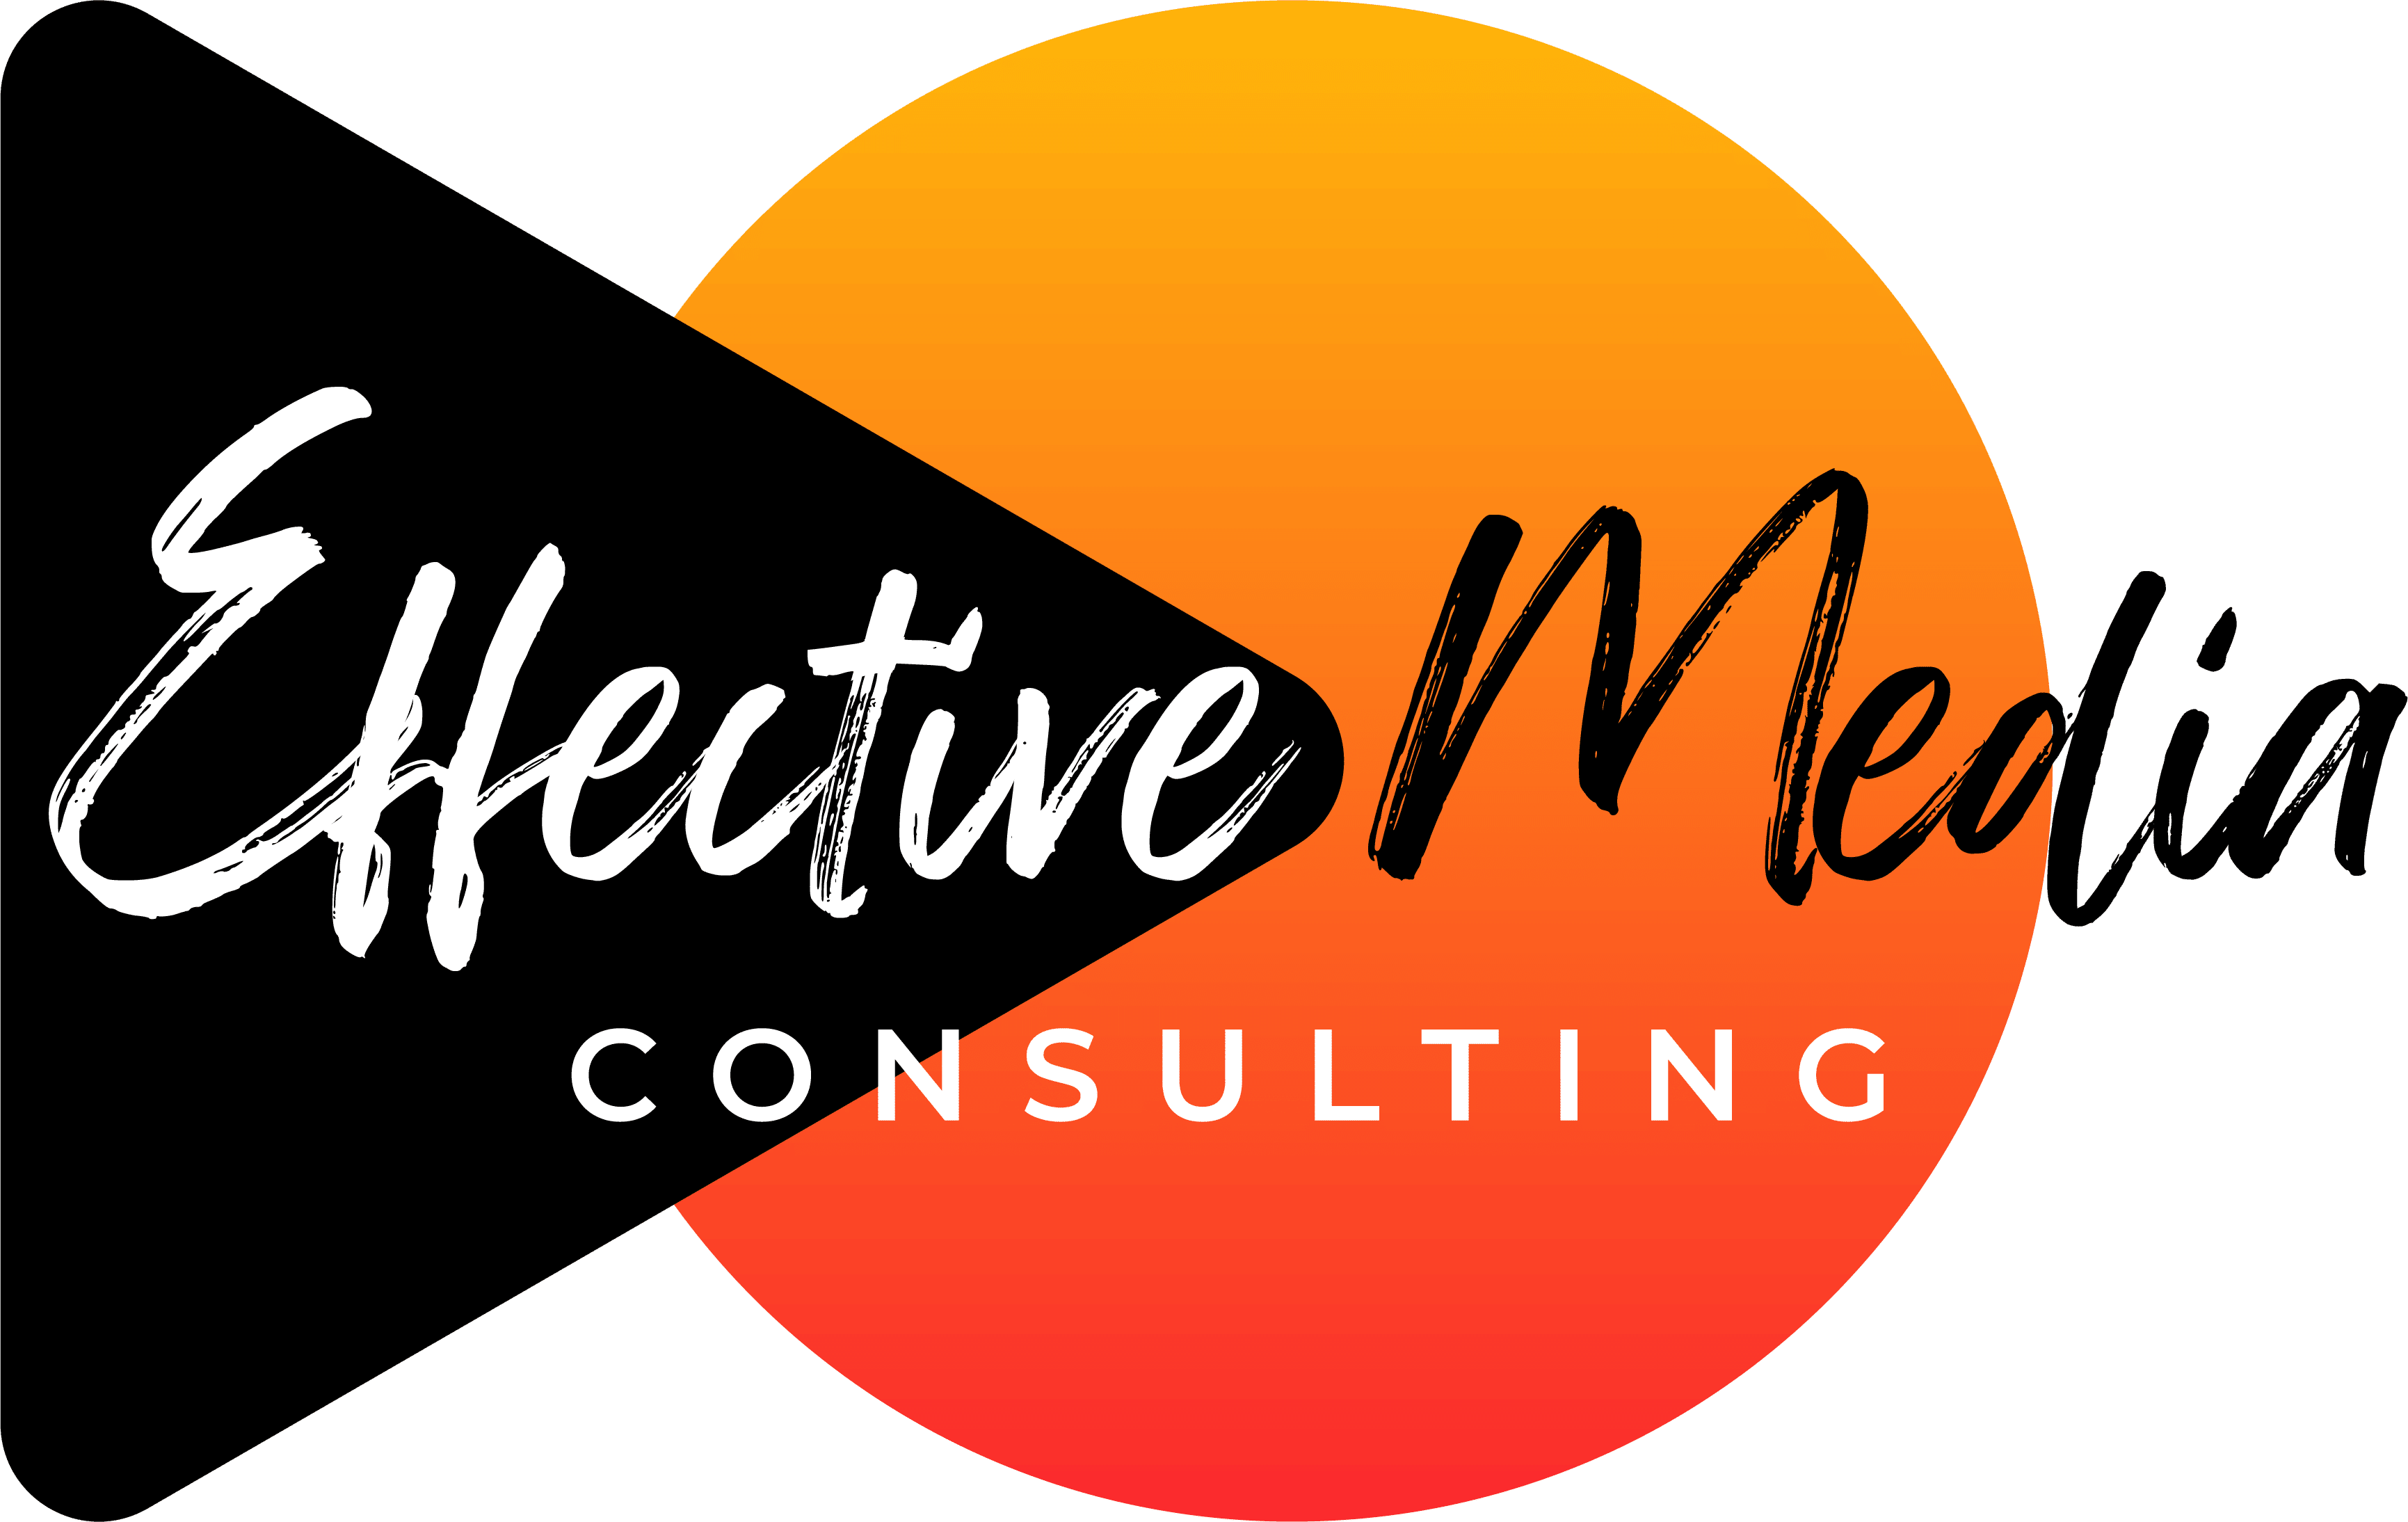 Effective Media Consulting